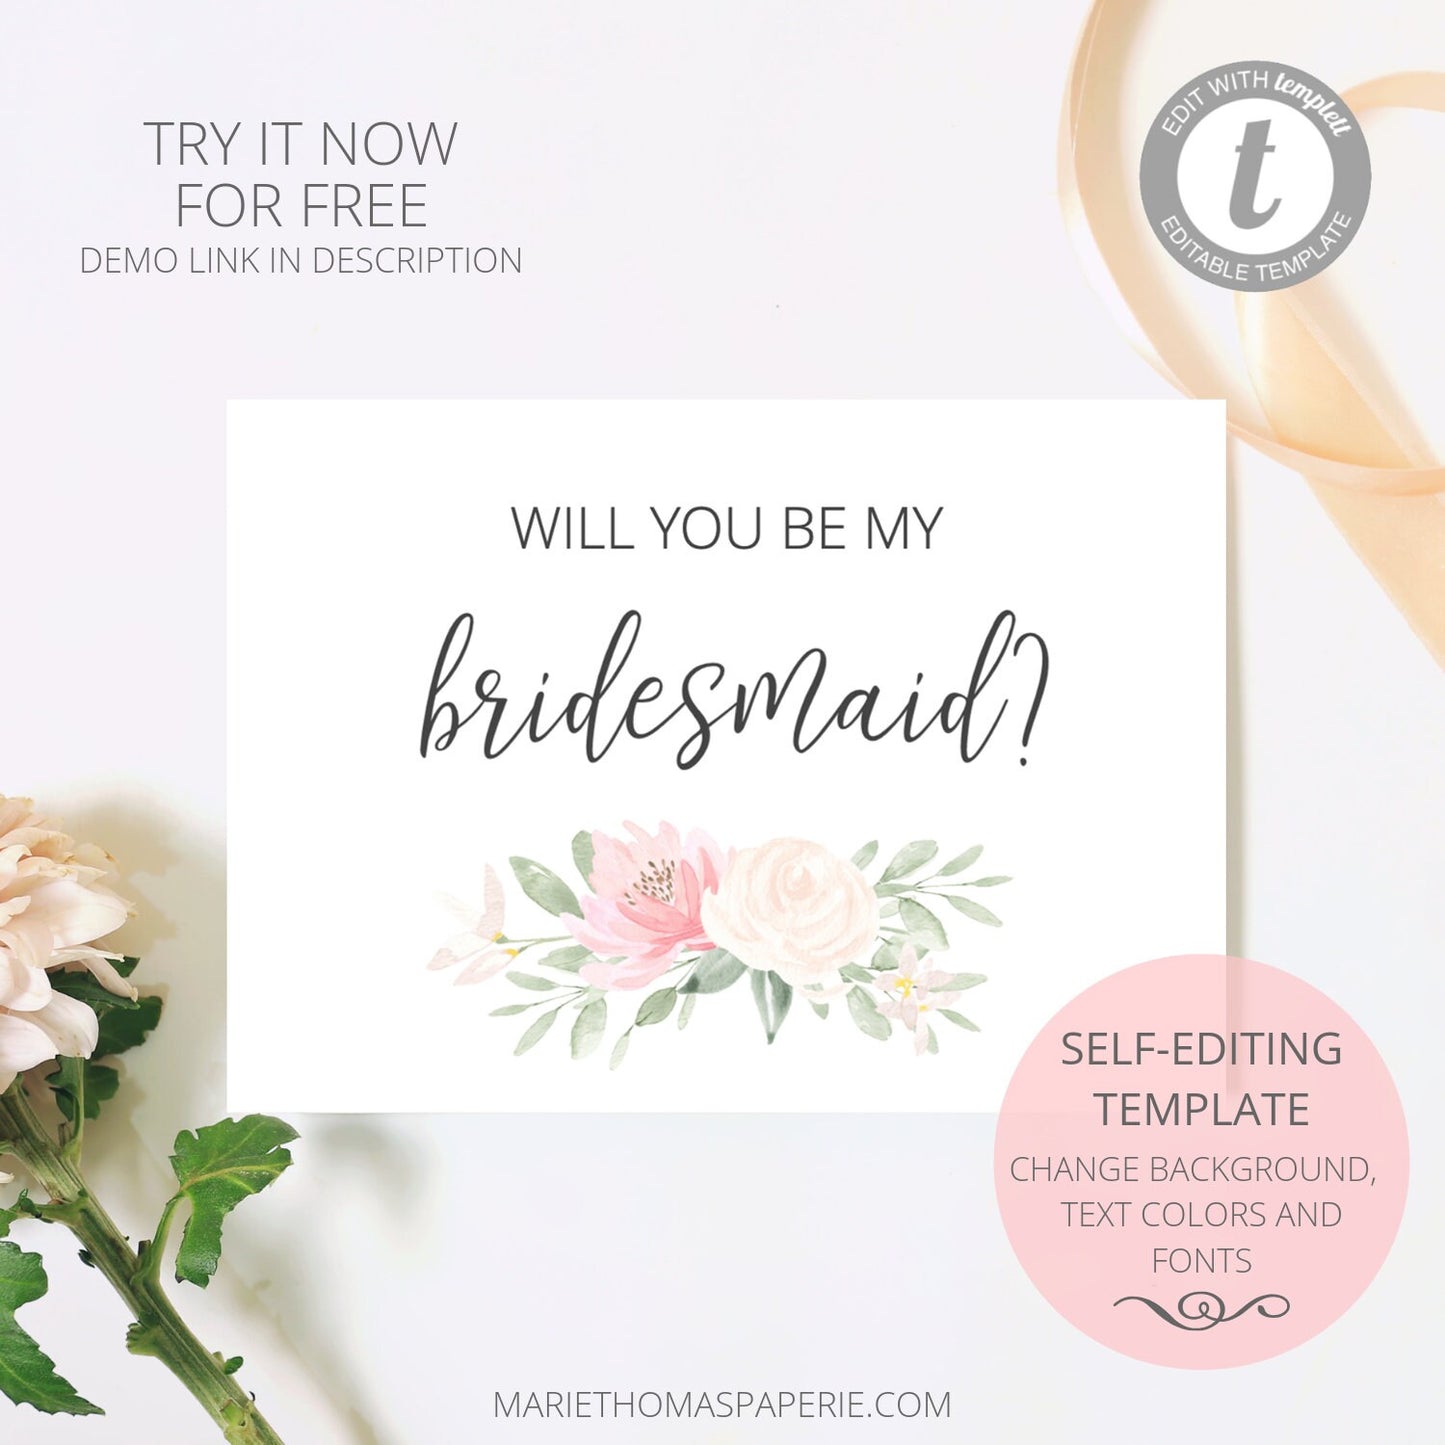 Editable Bridesmaid Proposal Card Will You Be My Bridesmaid Card Blush Pink Floral Maid of Honor Proposal Card Template Template